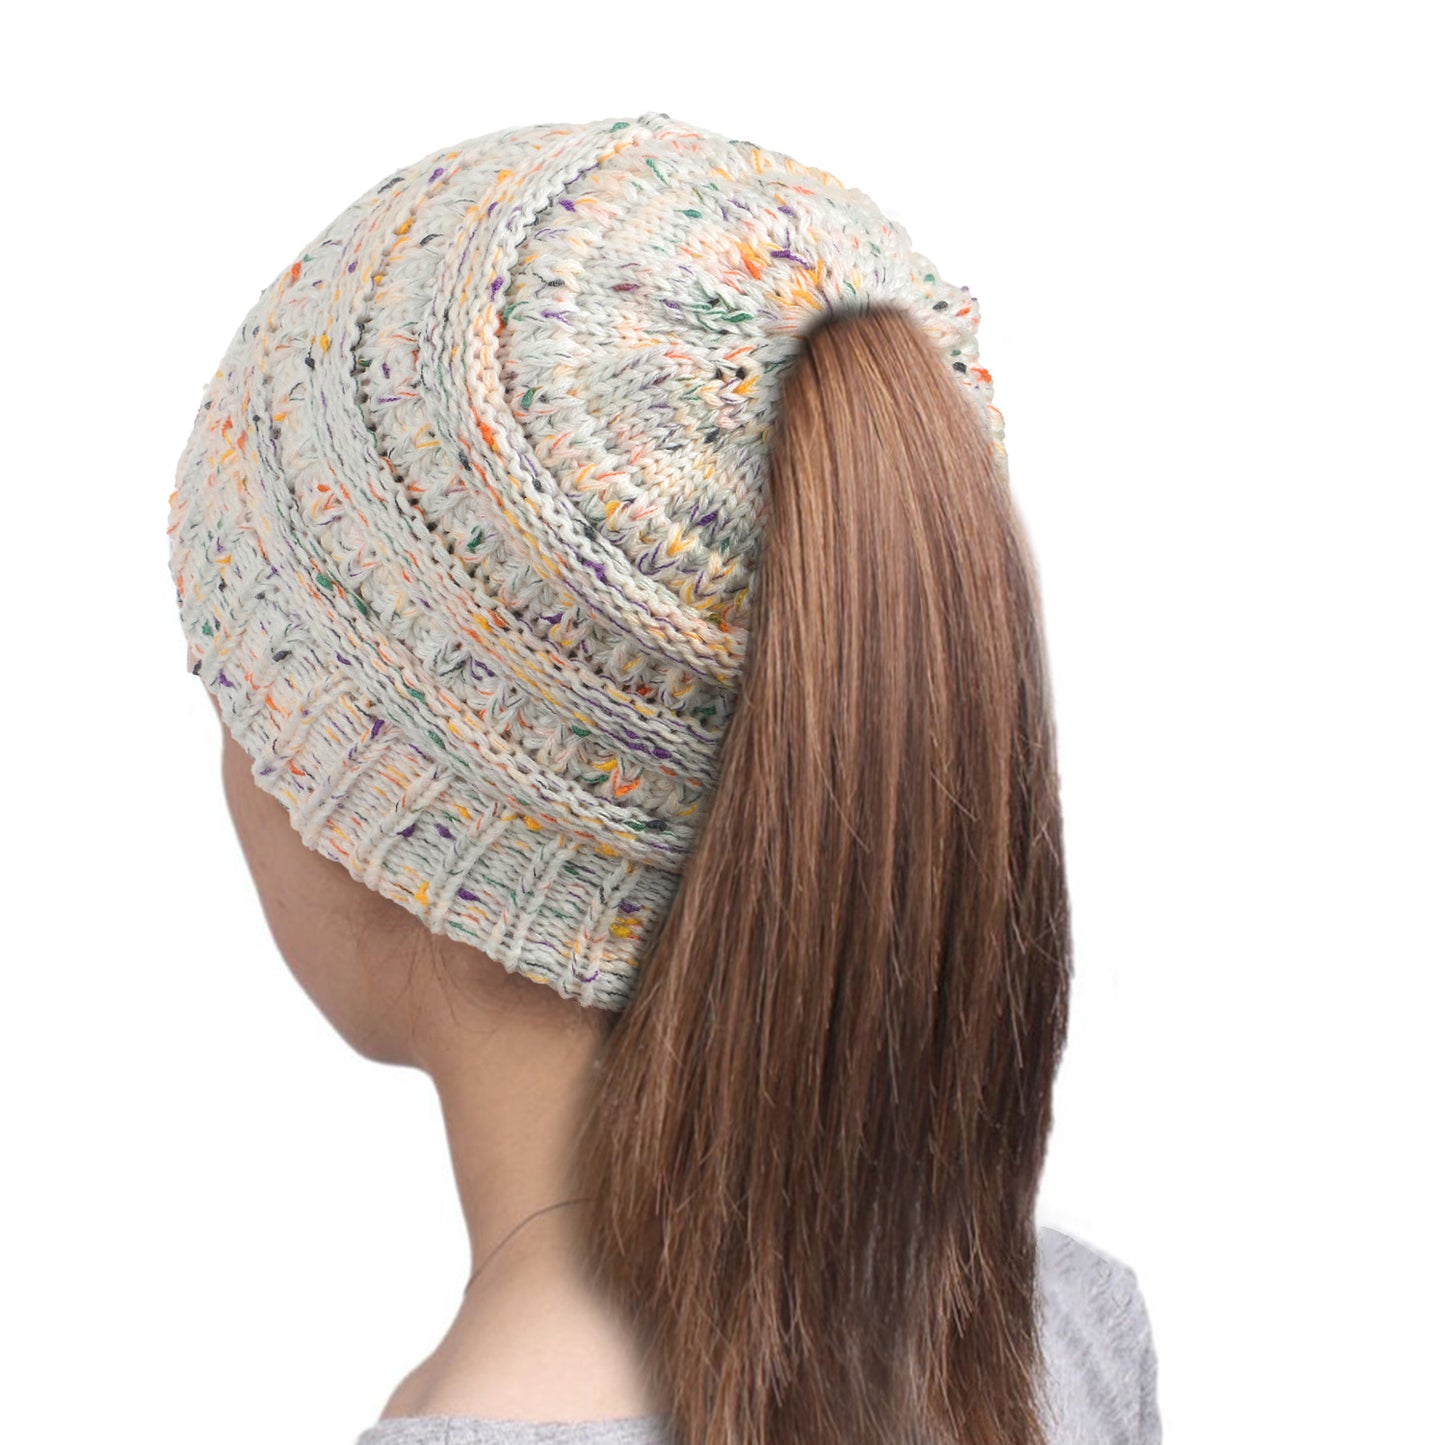 Women's Fashion Color Block Embroidery Eaveless Wool Cap